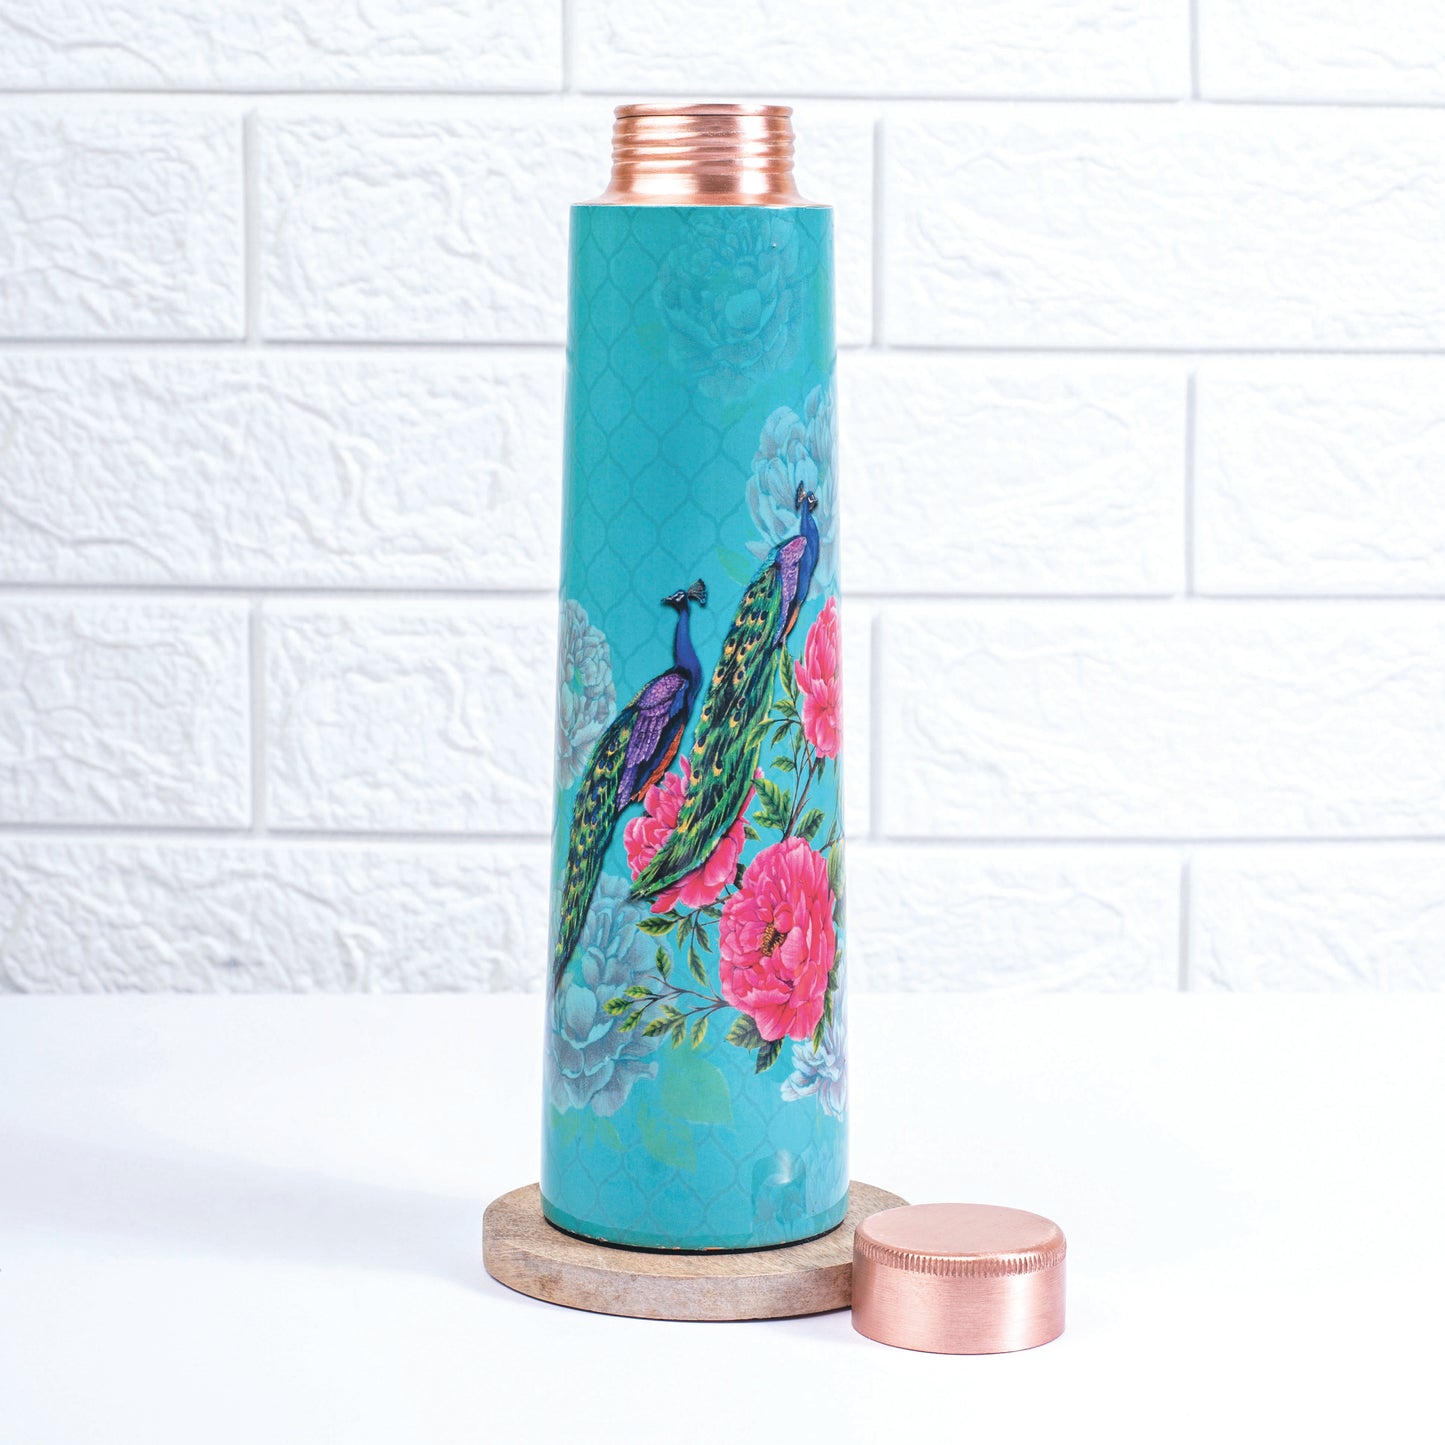 The Royal Peacock Copper bottle